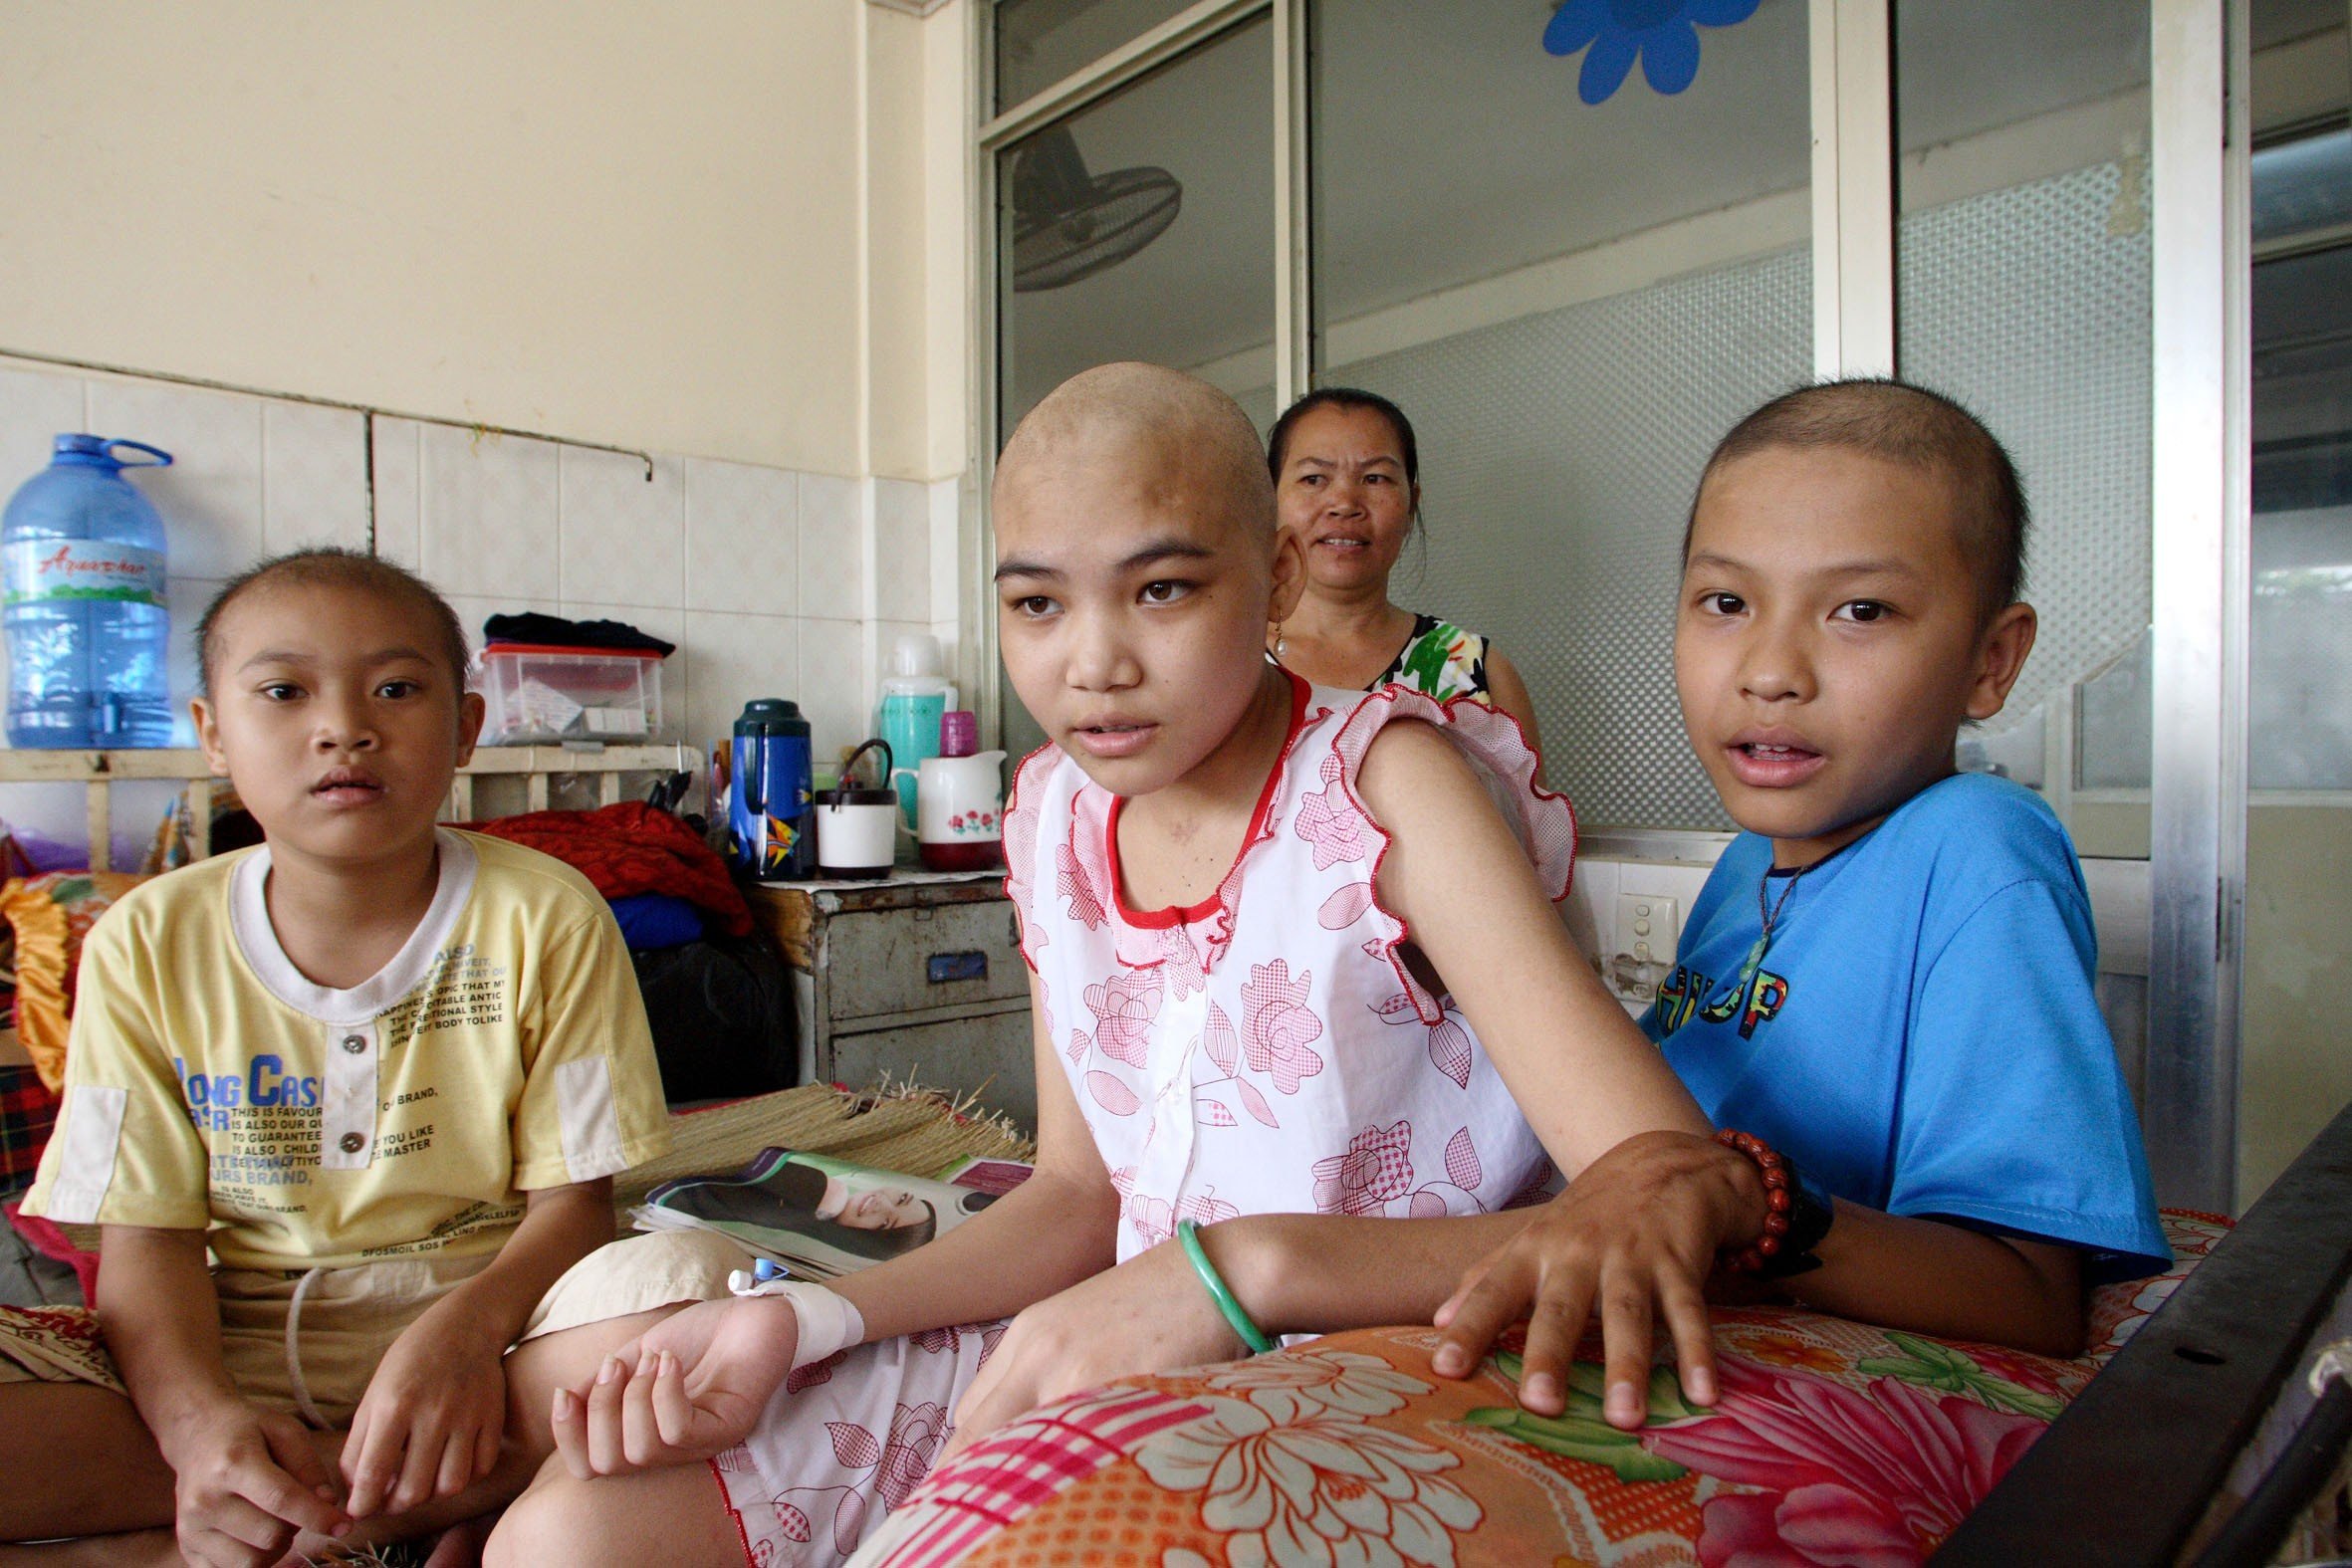 Children’s cancers are mostly curable, the conference was told. Photo: Alamy